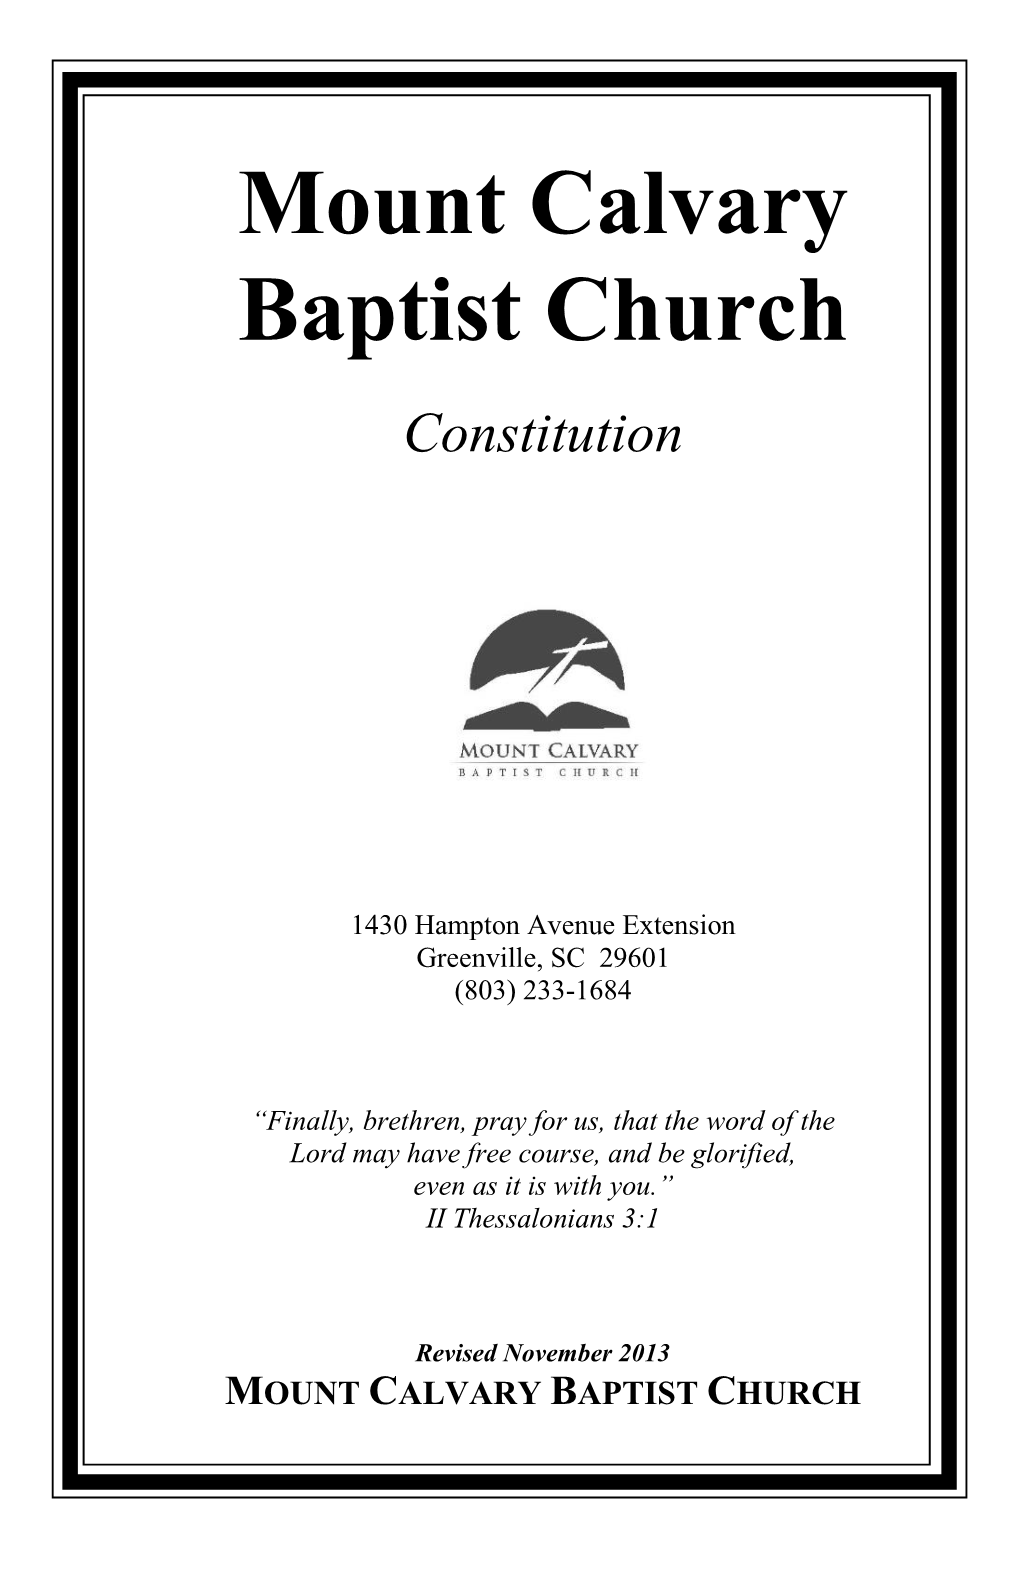 Church Constitution and Doctrinal Statement